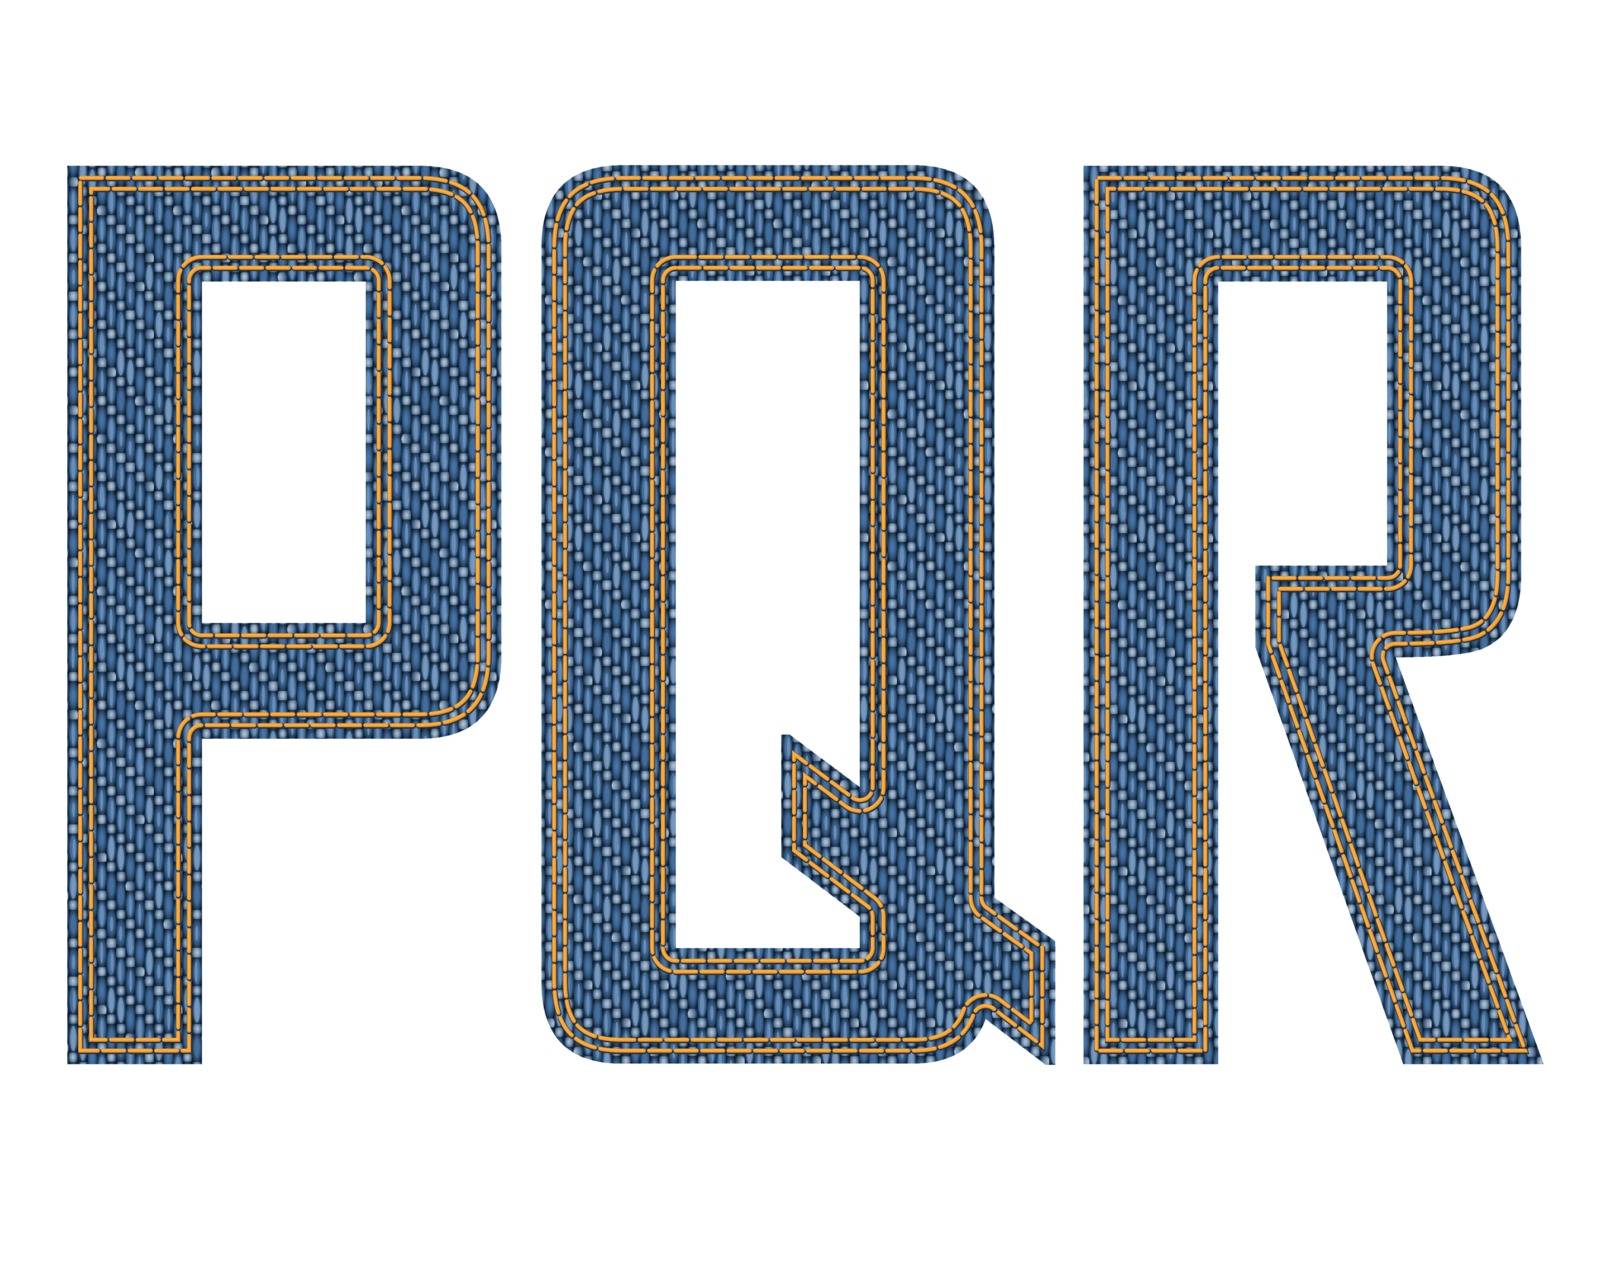 Denim fabric stithed letters. Vector illustration.